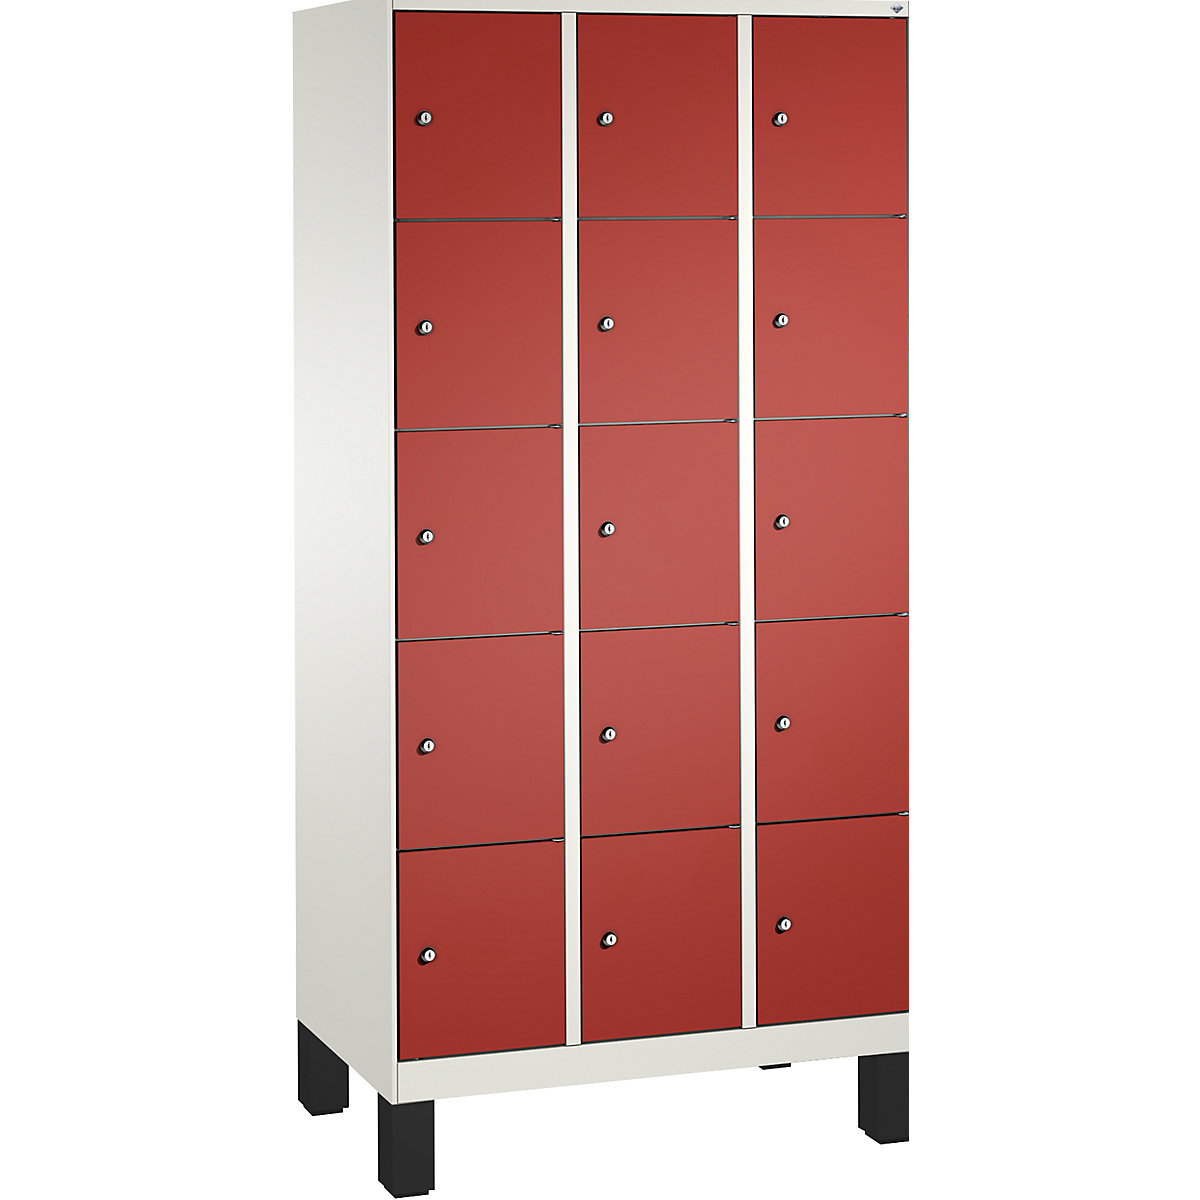 EVOLO locker unit, with feet – C+P, 3 compartments, 5 shelf compartments each, compartment width 300 mm, traffic white / flame red-7